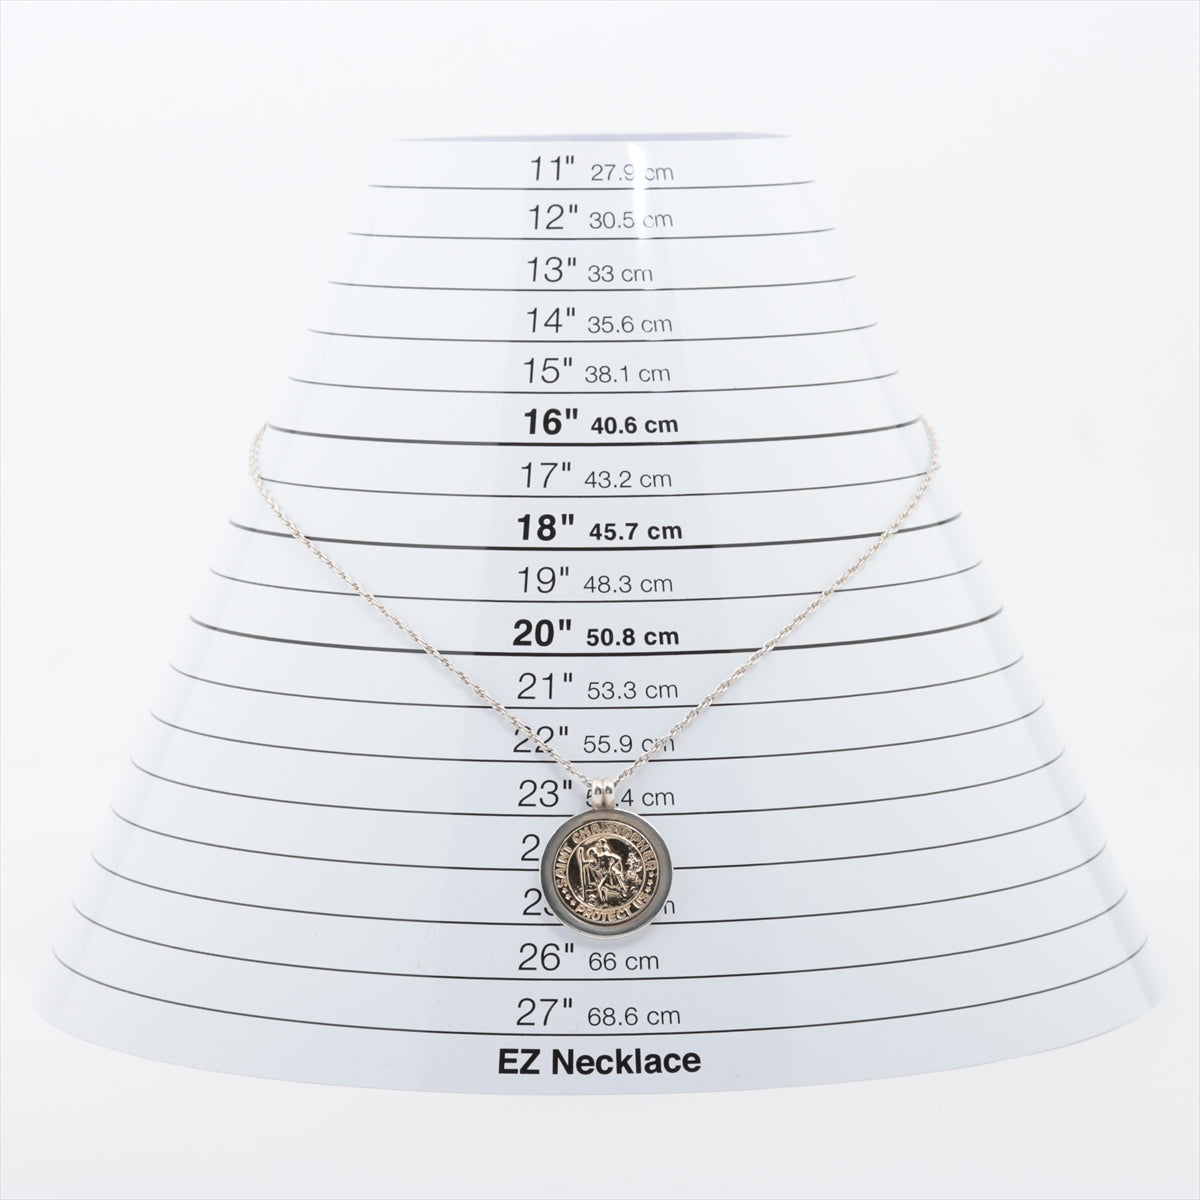 Tiffany Saint Christopher Necklace 925×750 14.2g Silver x gold Coin